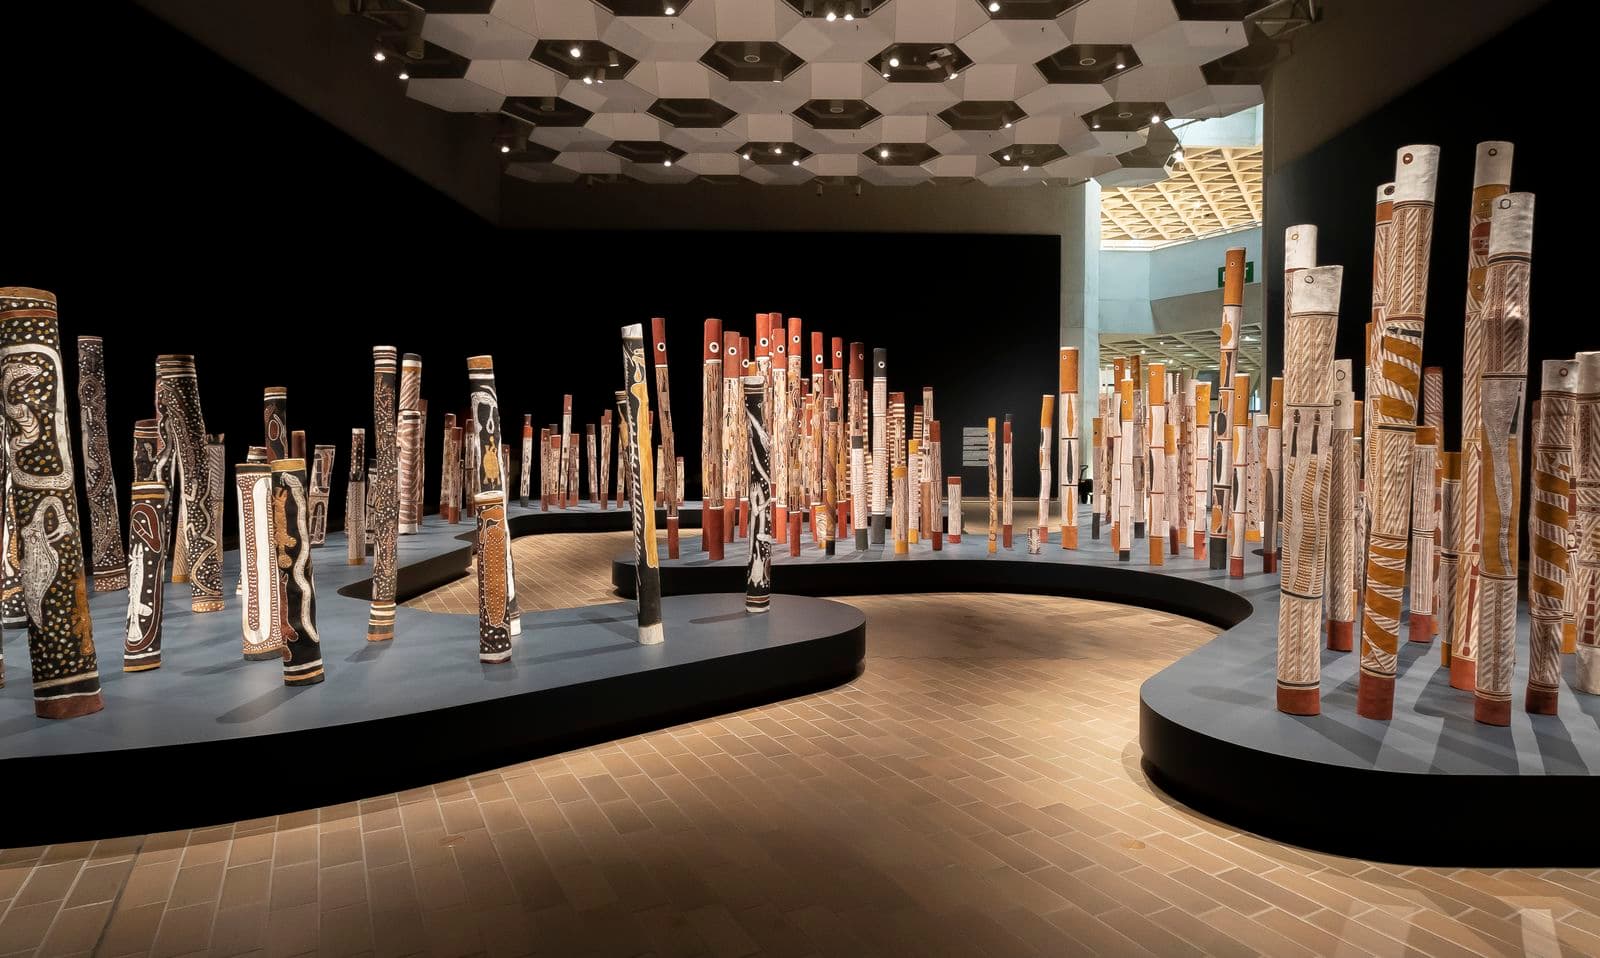 A wide-angle photograph showing an installation of 200 painted hollow logs standing upright in a large gallery space. The surrounding walls are painted in a dark colour and the logs are positioned on a navy plinth shaped to resemble both sides of a river bank.